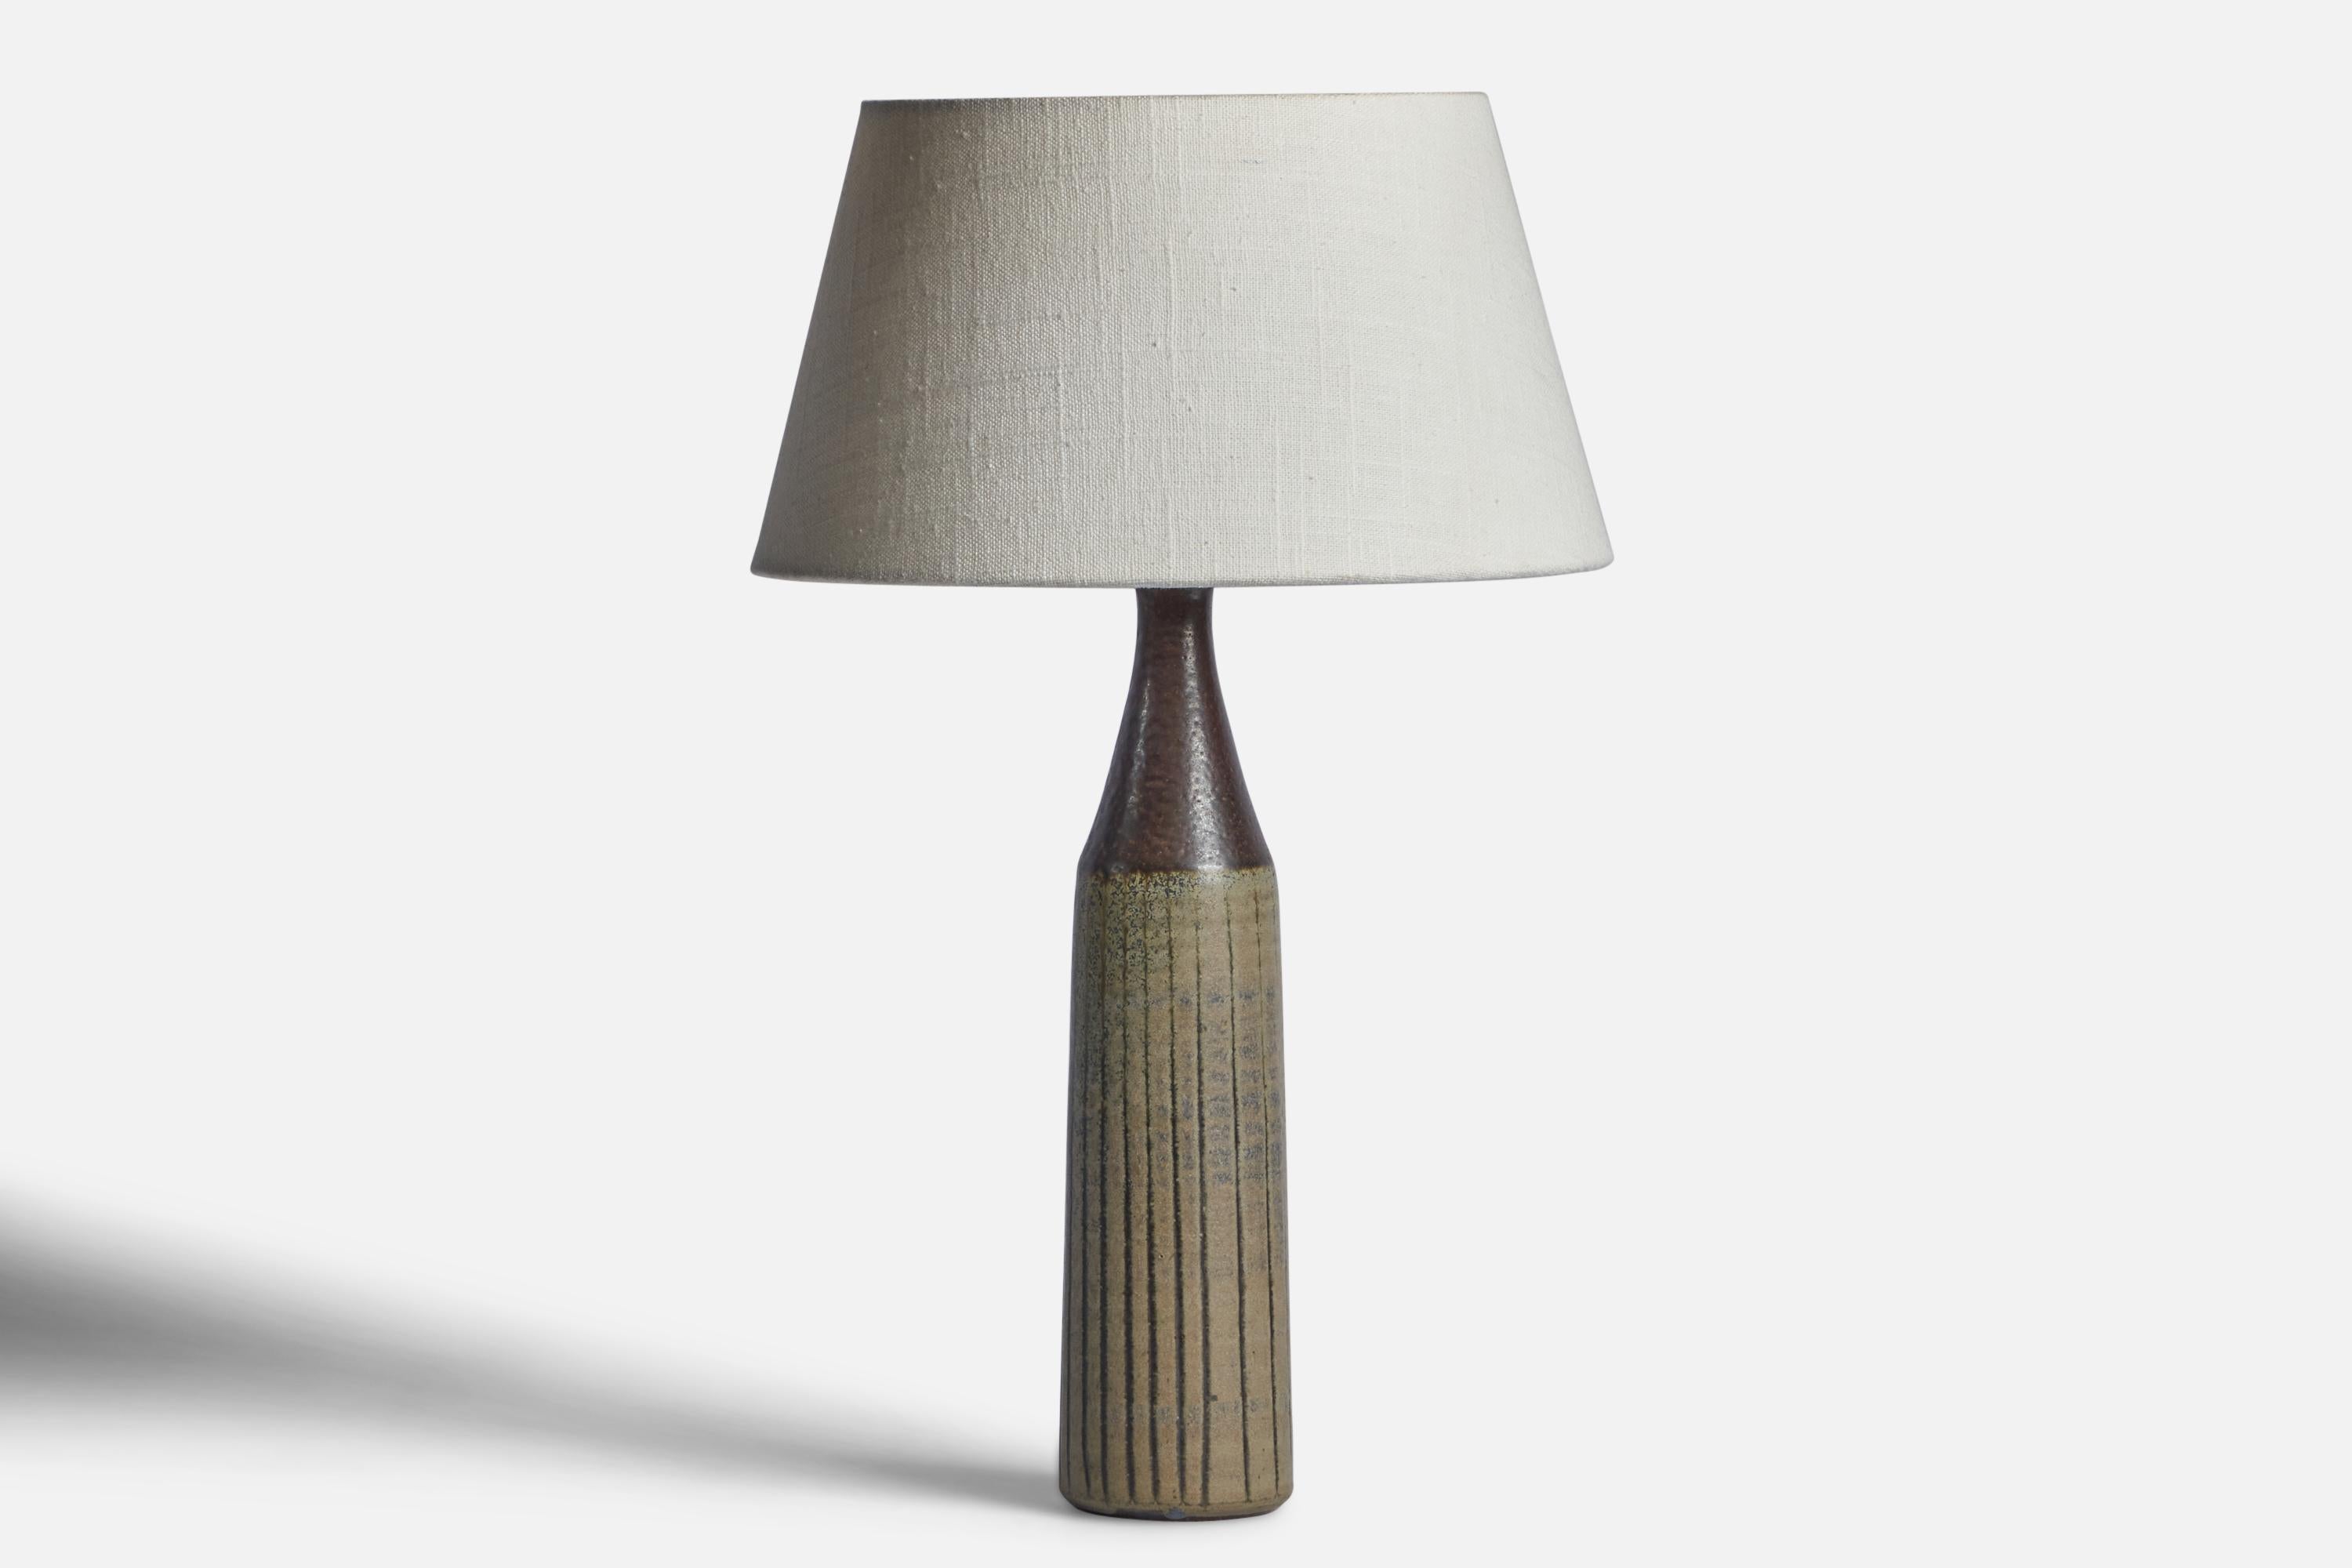 A grey and green-glazed stoneware table lamp designed and produced by Wallåkra, Sweden, c. 1950s.

Dimensions of Lamp (inches): 13.25” H x 2.75” Diameter
Dimensions of Shade (inches): 7” Top Diameter x 10” Bottom Diameter x 5.5” H 
Dimensions of